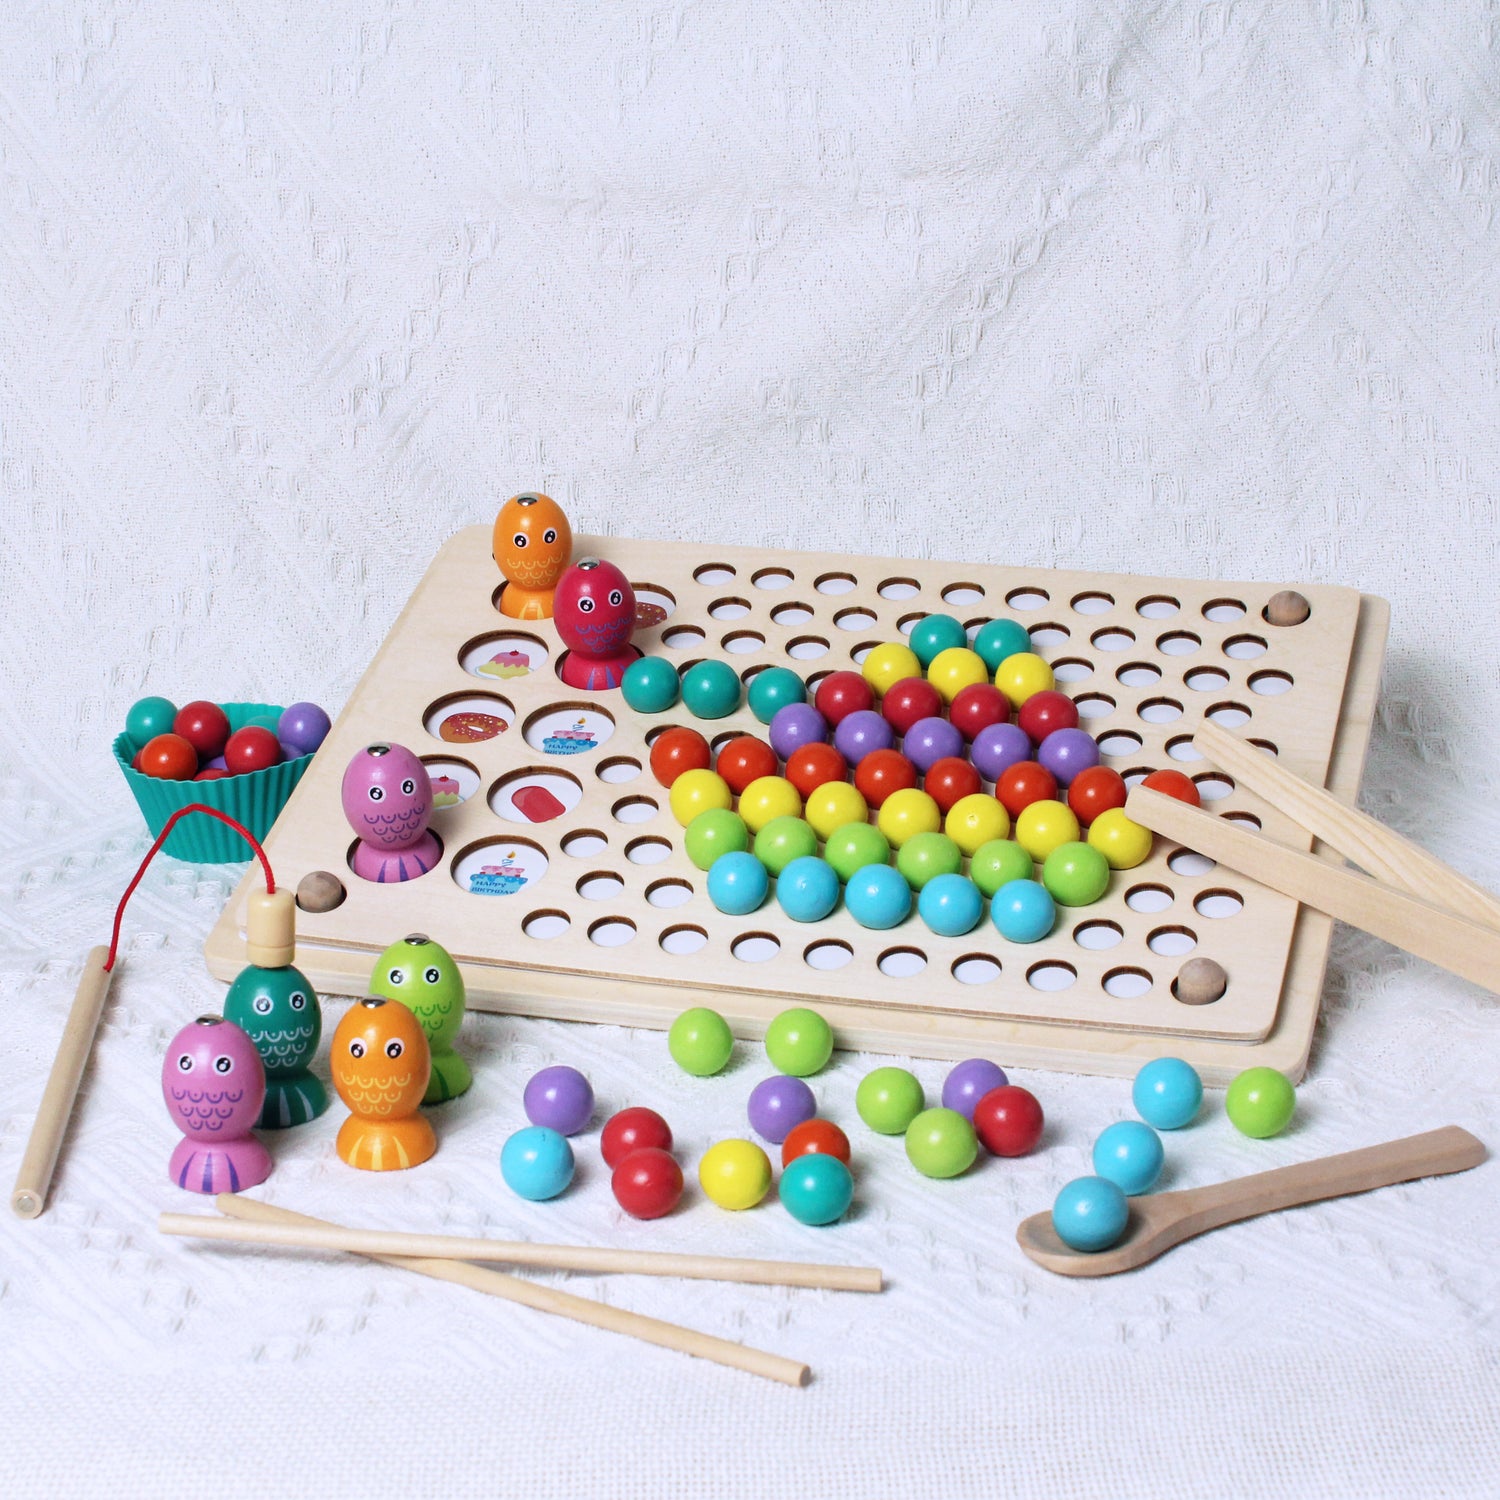 creating picture with colourful wooden balls sorting game and colourful wooden fishes fishing memory game, chopsticks, thong, spoon, fishing rod and silicone cups provided for fun and educational experience